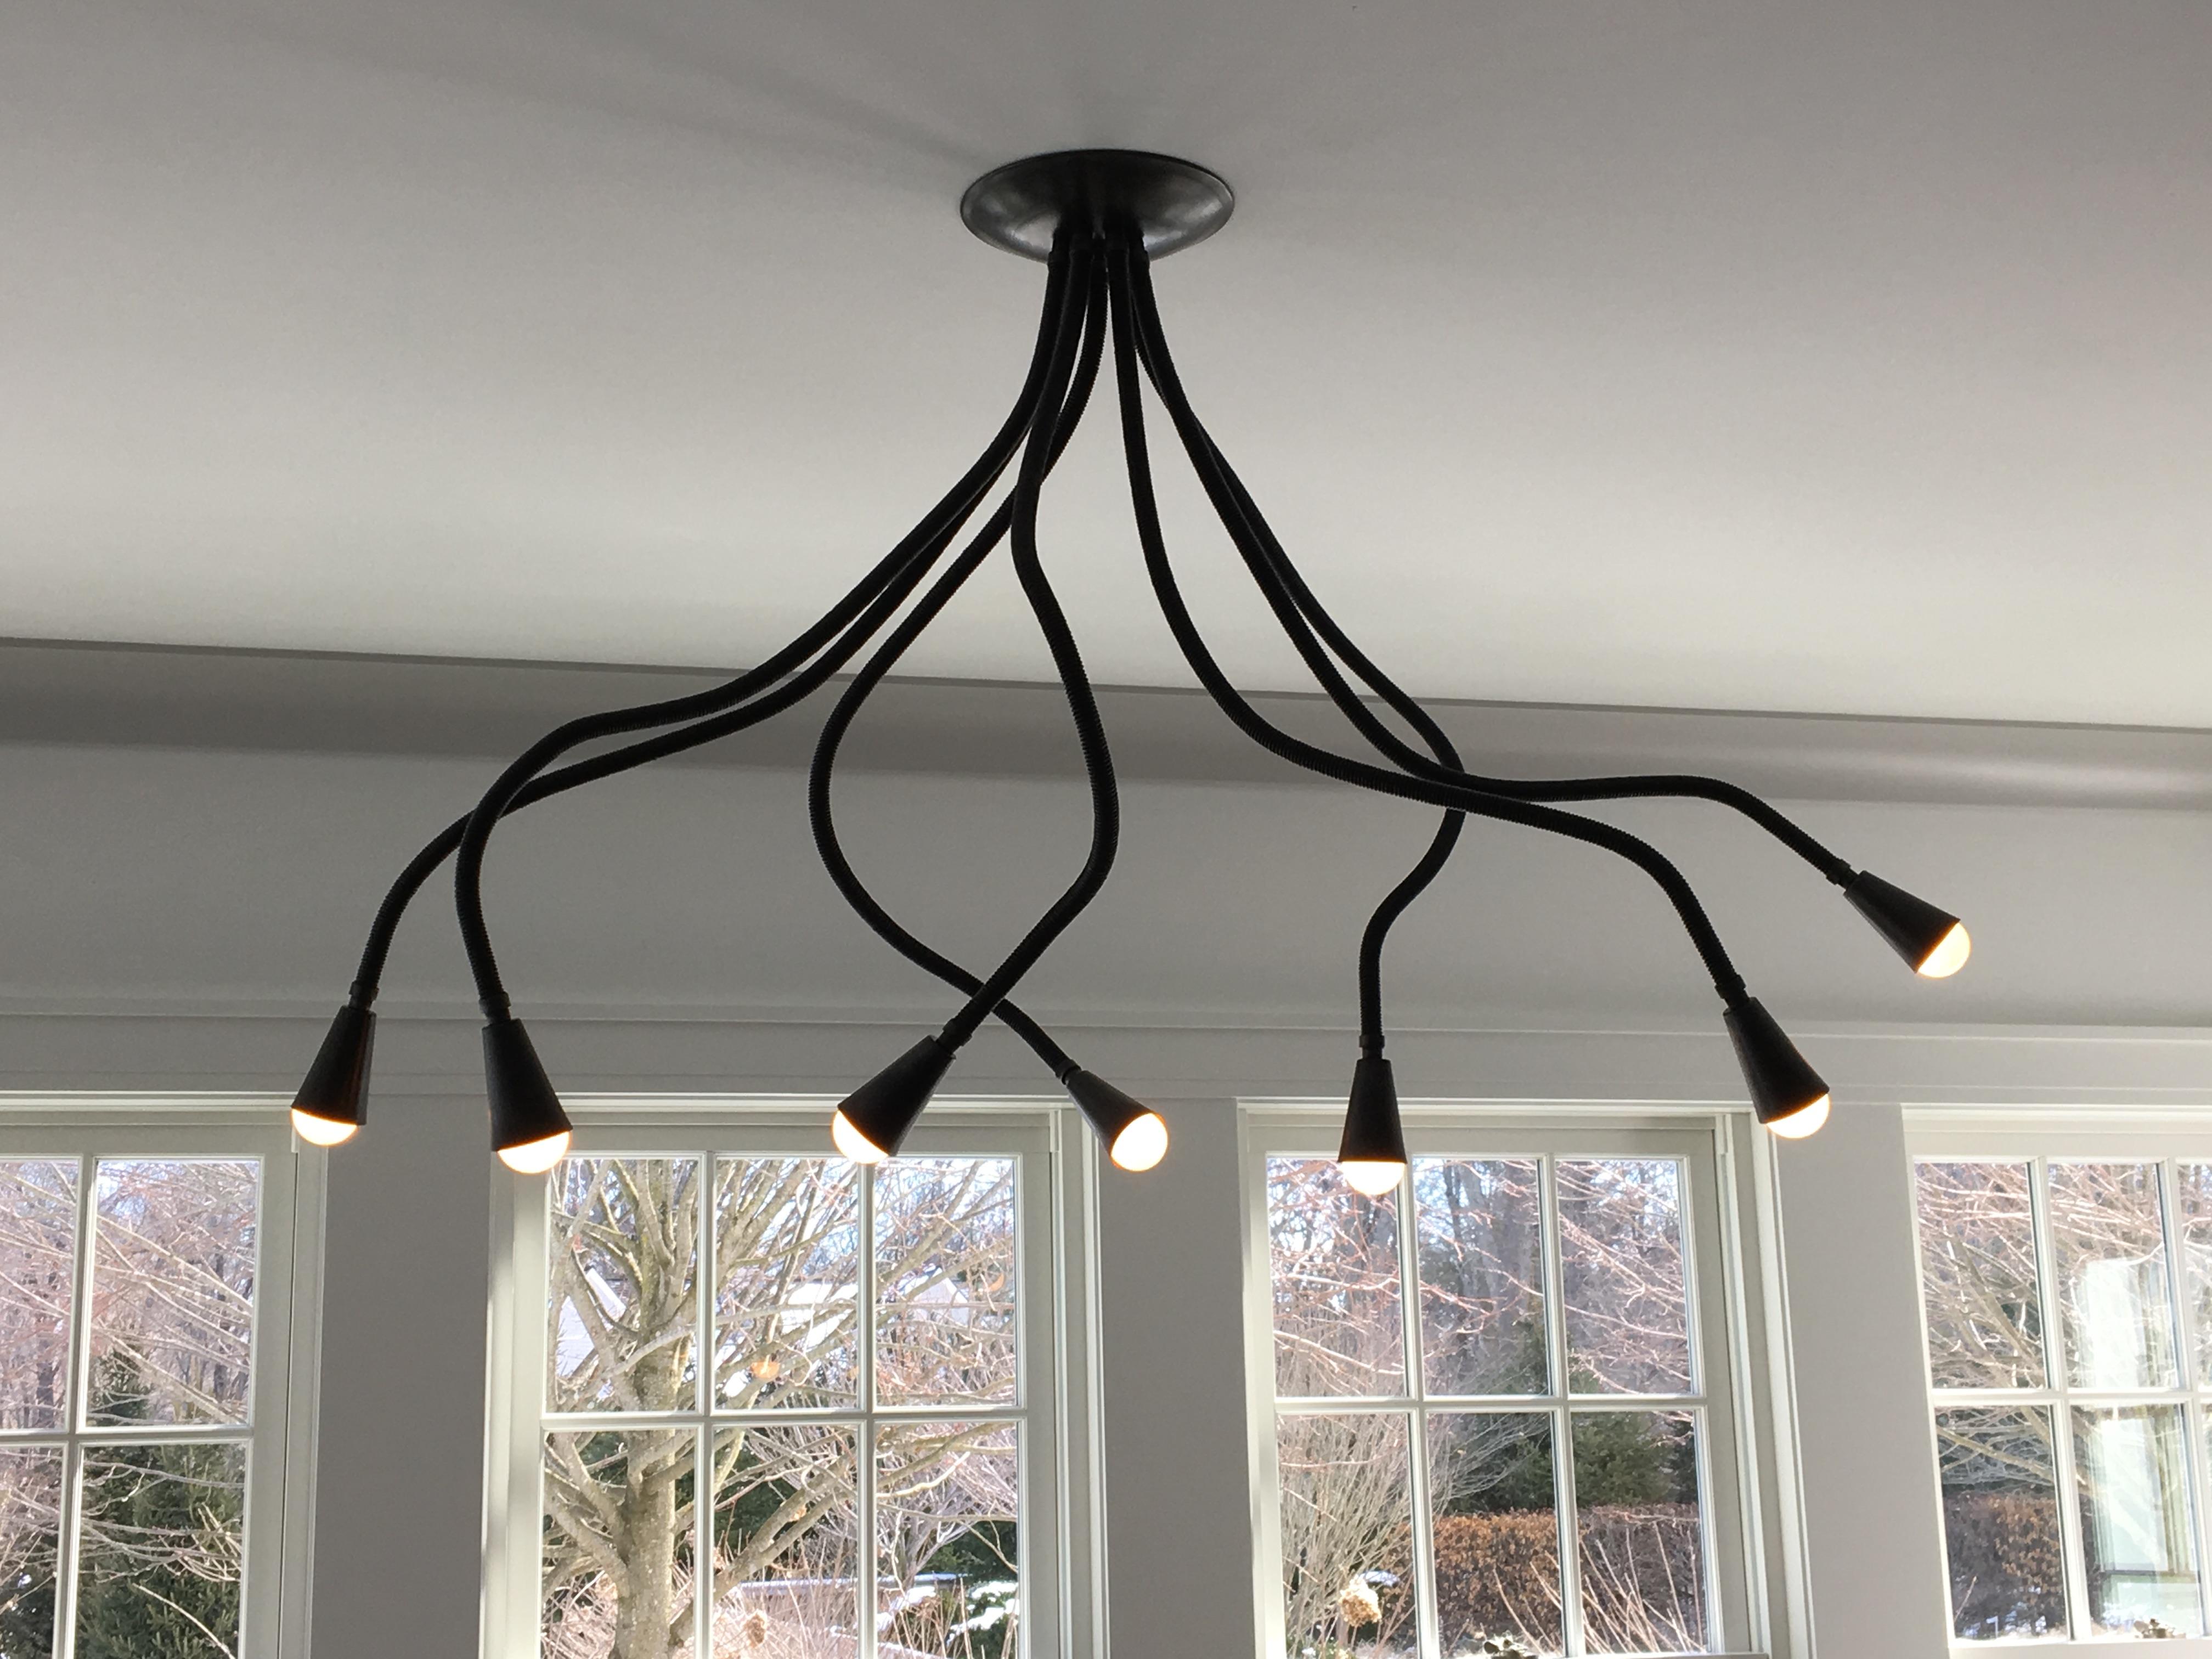 7-arm all black meander chandelier with matte black leather and black metal finish. Adjustable arms let you style the chandelier as you wish. Overall measurements vary depending on how you pose the arms.
Arms are 36